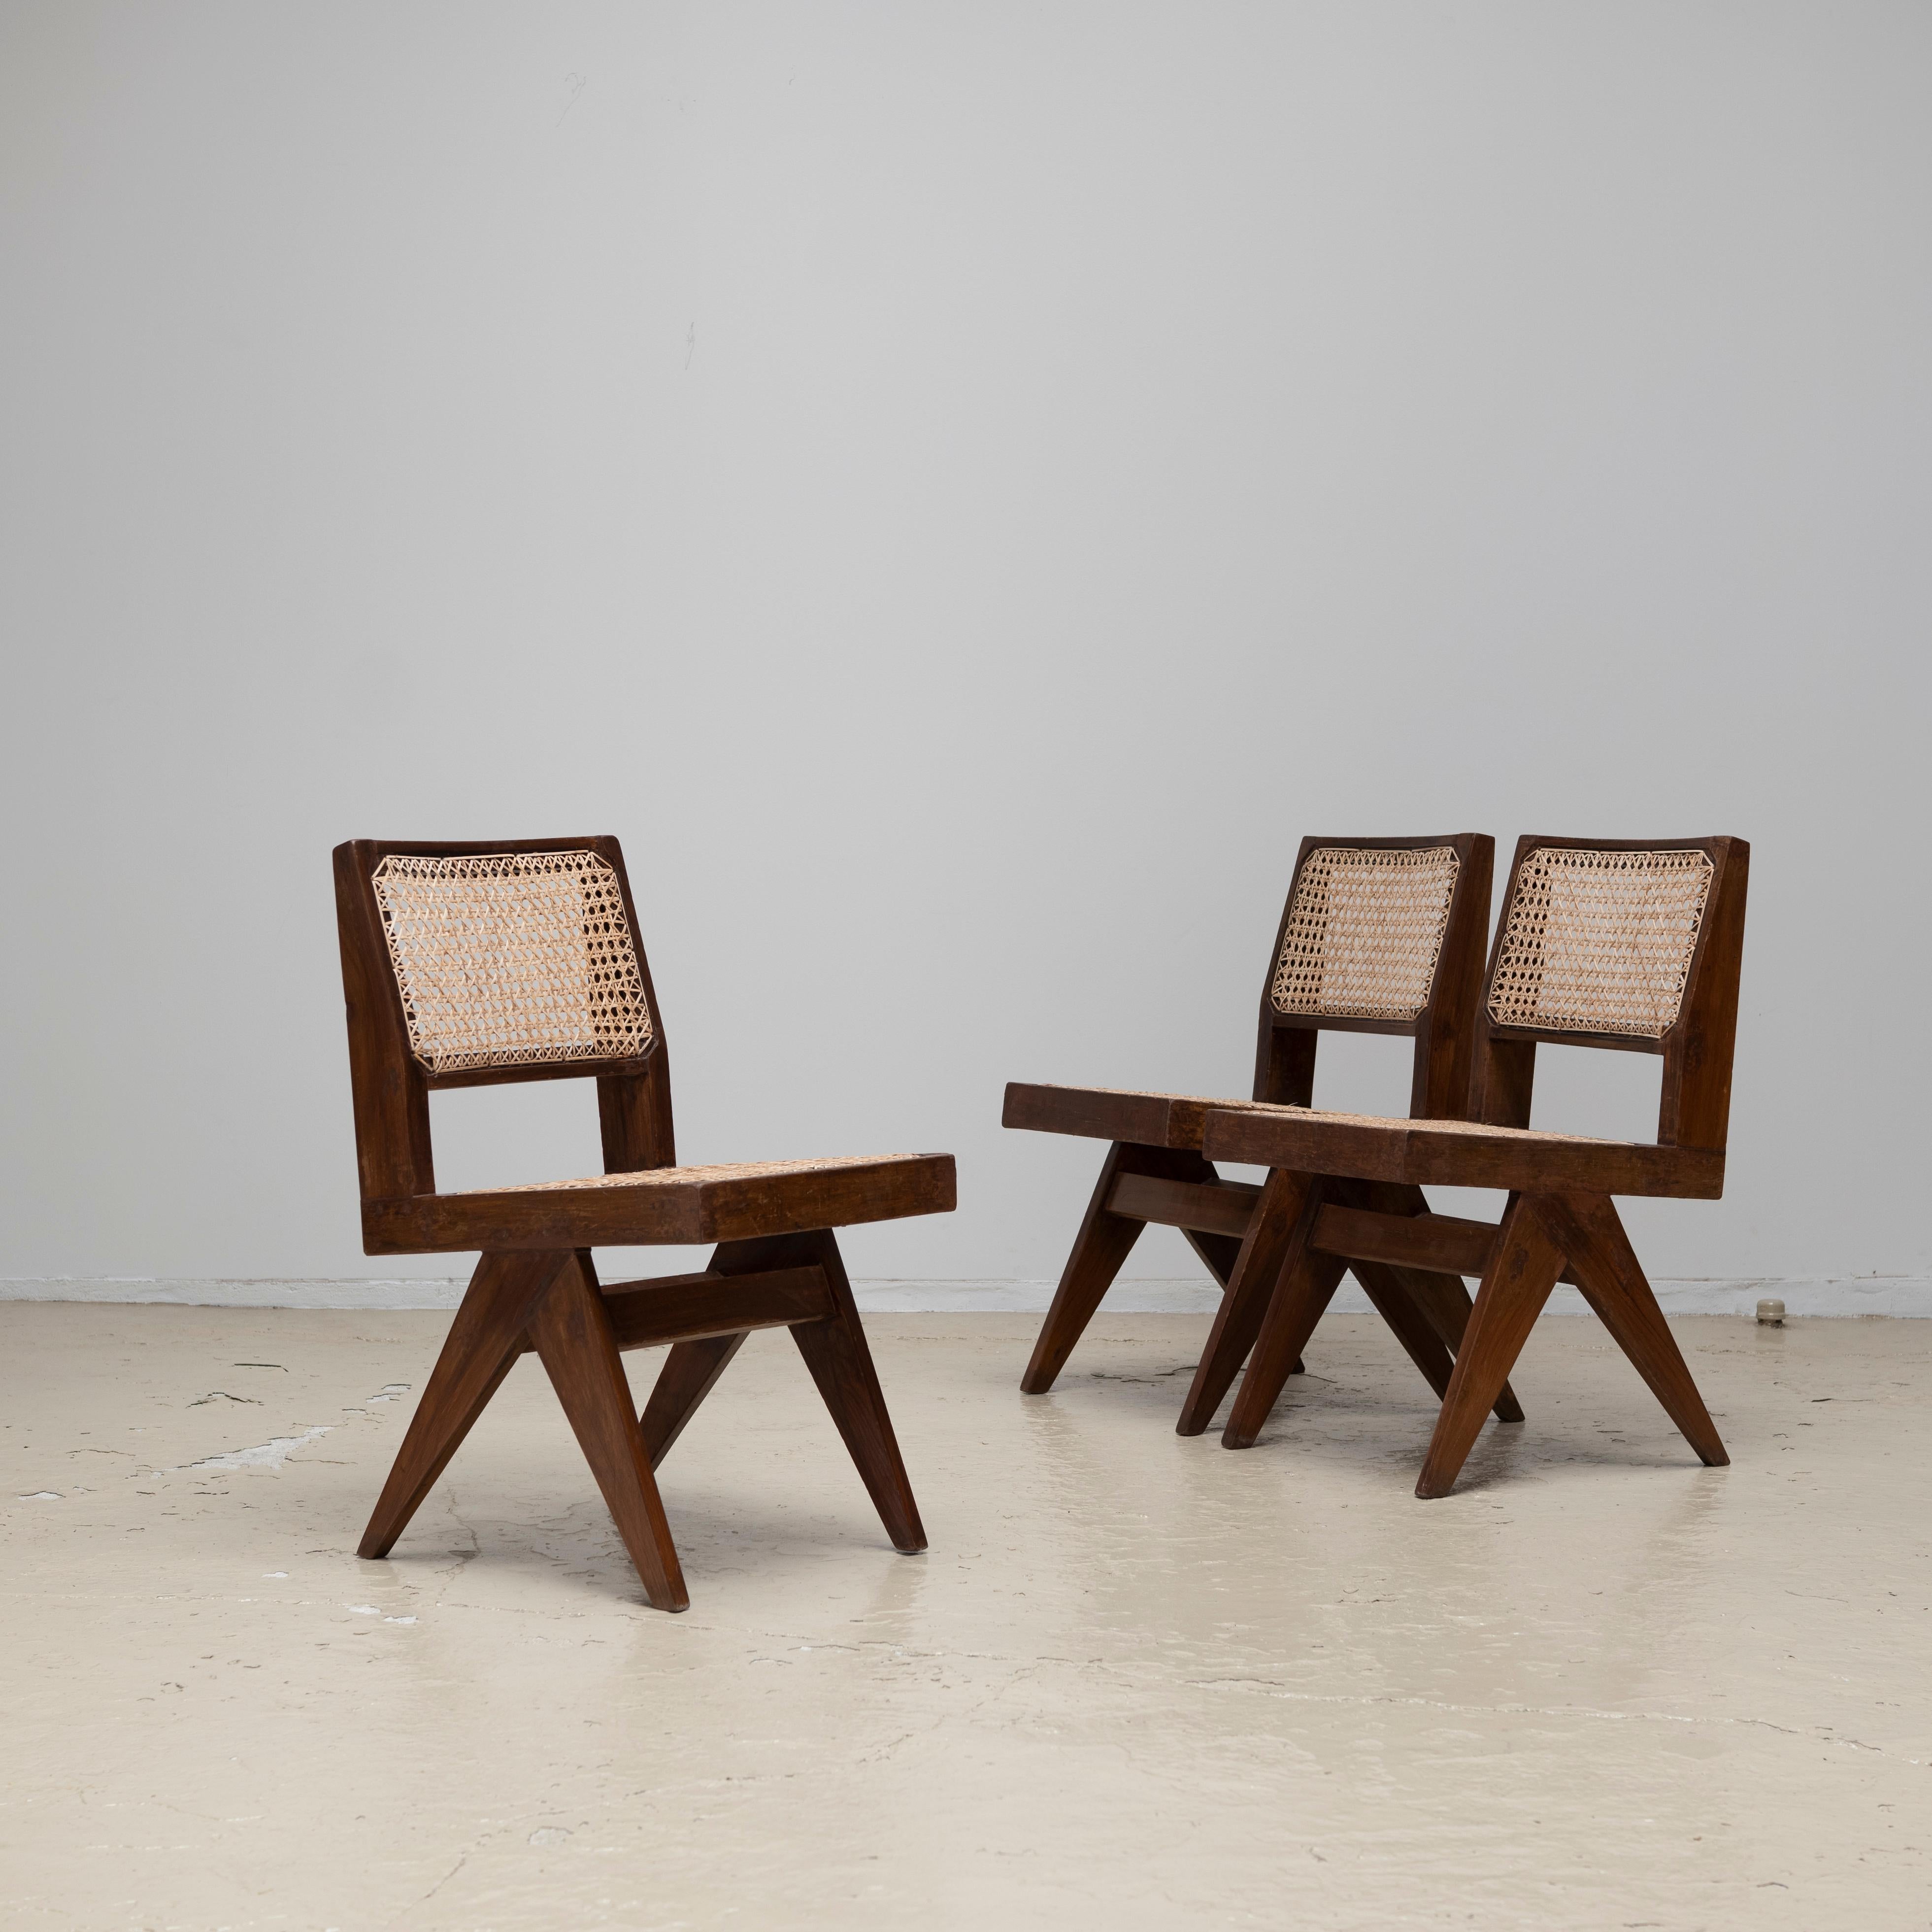 Armless dining chairs designed by Pierre Jeanneret
Sold individually.
Provenance: Panjab University Boys Hostel, Chandigarh, India